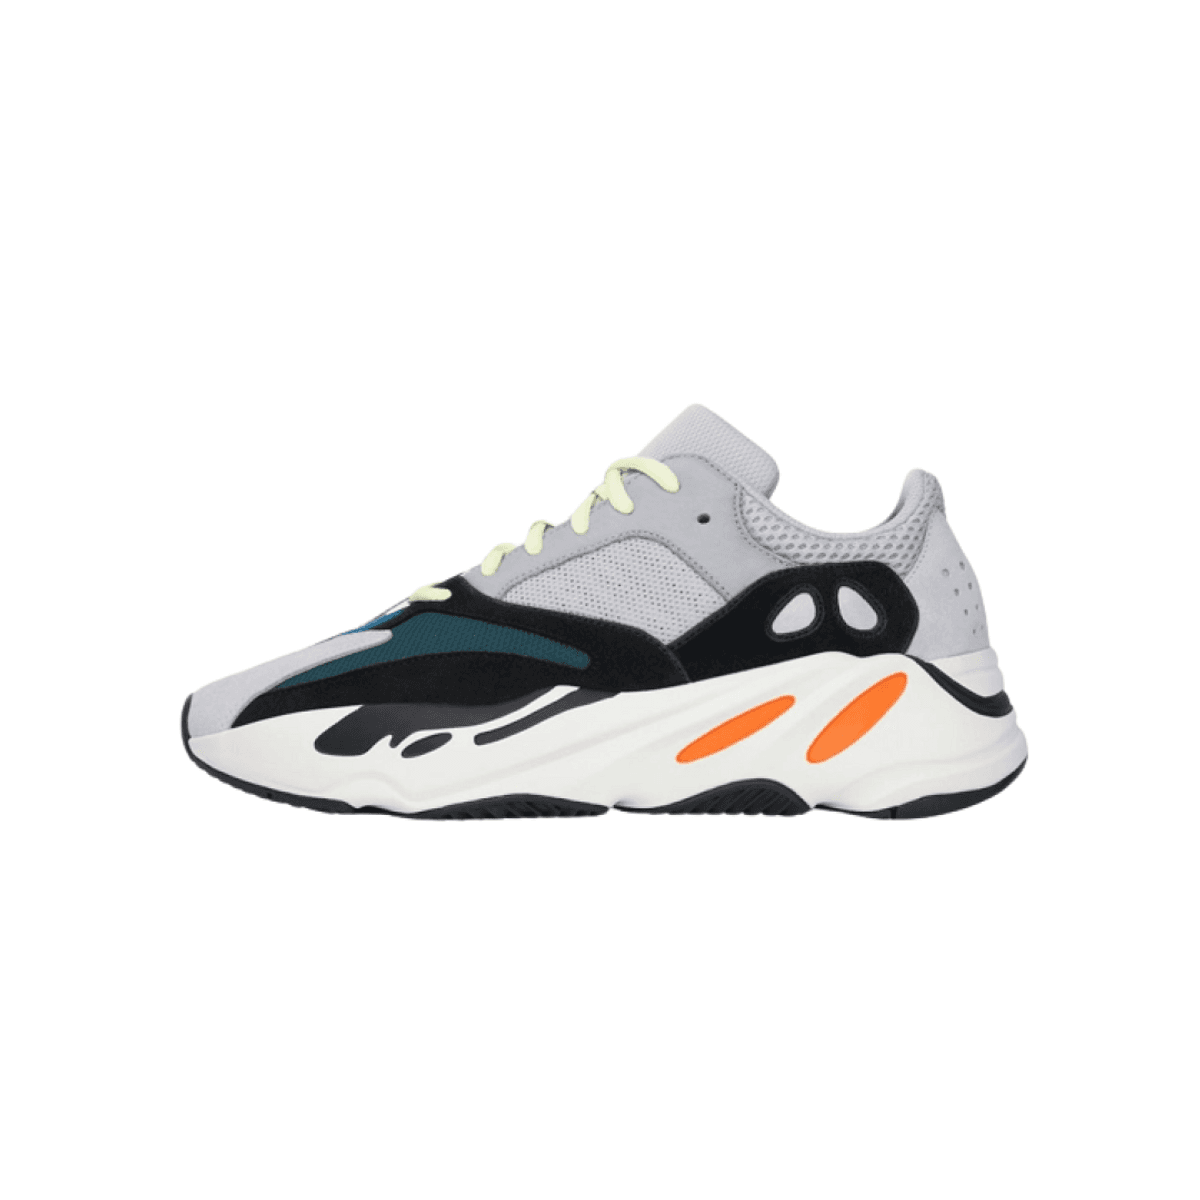 The Yeezy 700 Wave Runner Is Back